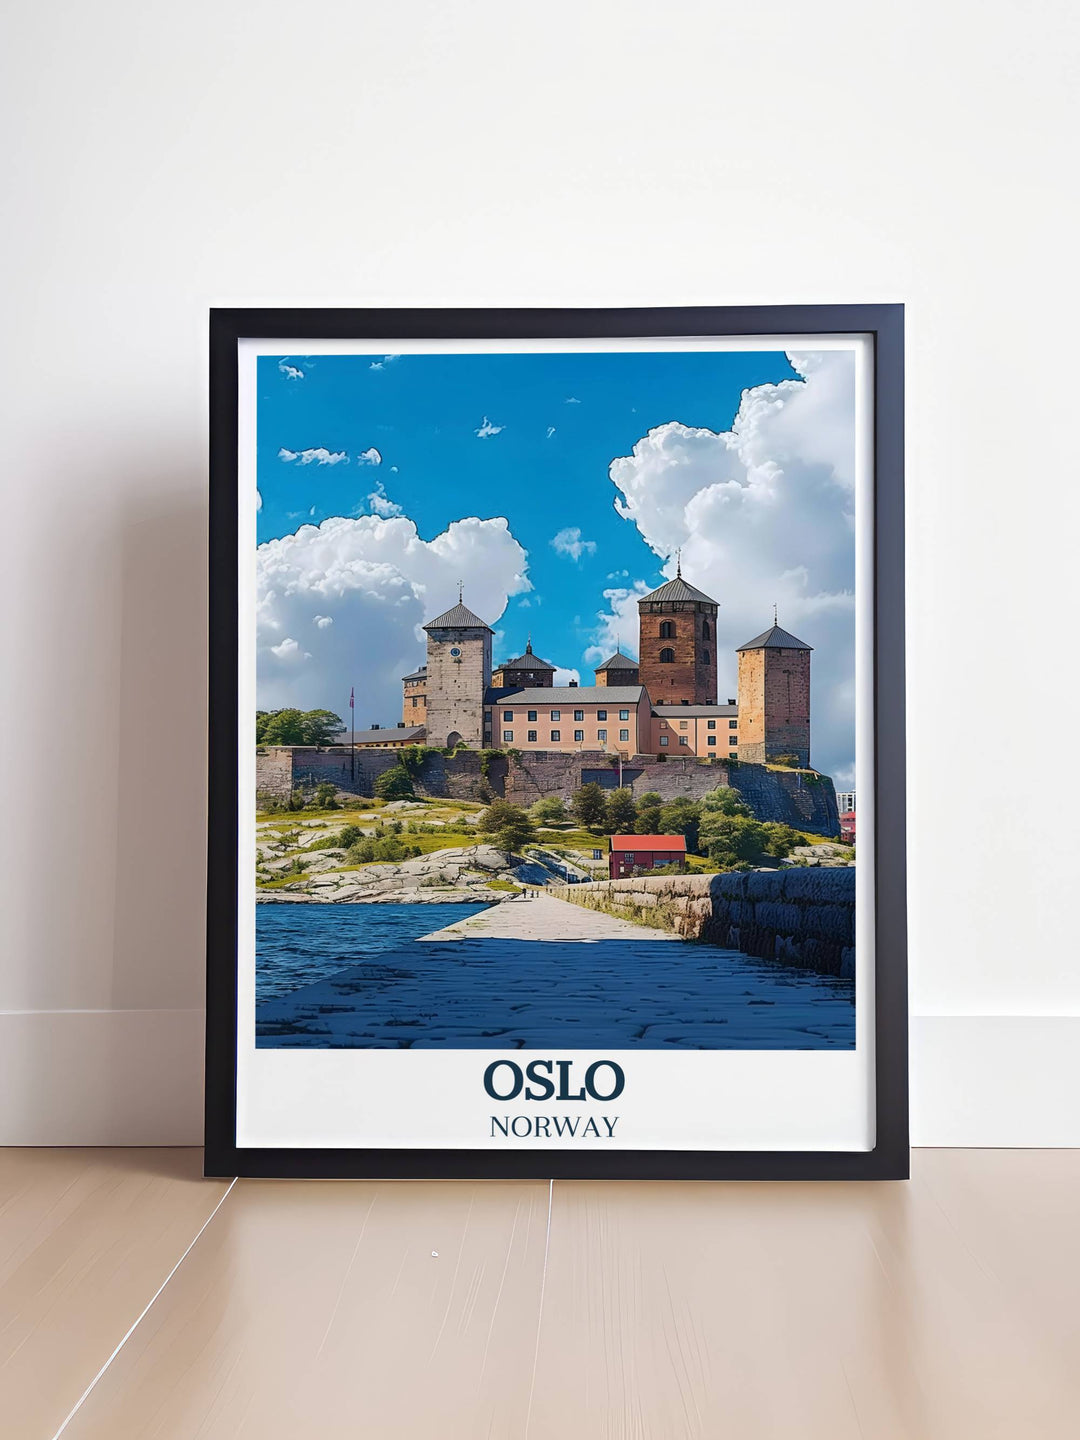 Home decor featuring Oslos iconic Radhuset and Akershus Fortress, perfect for adding Scandinavian charm to any room.